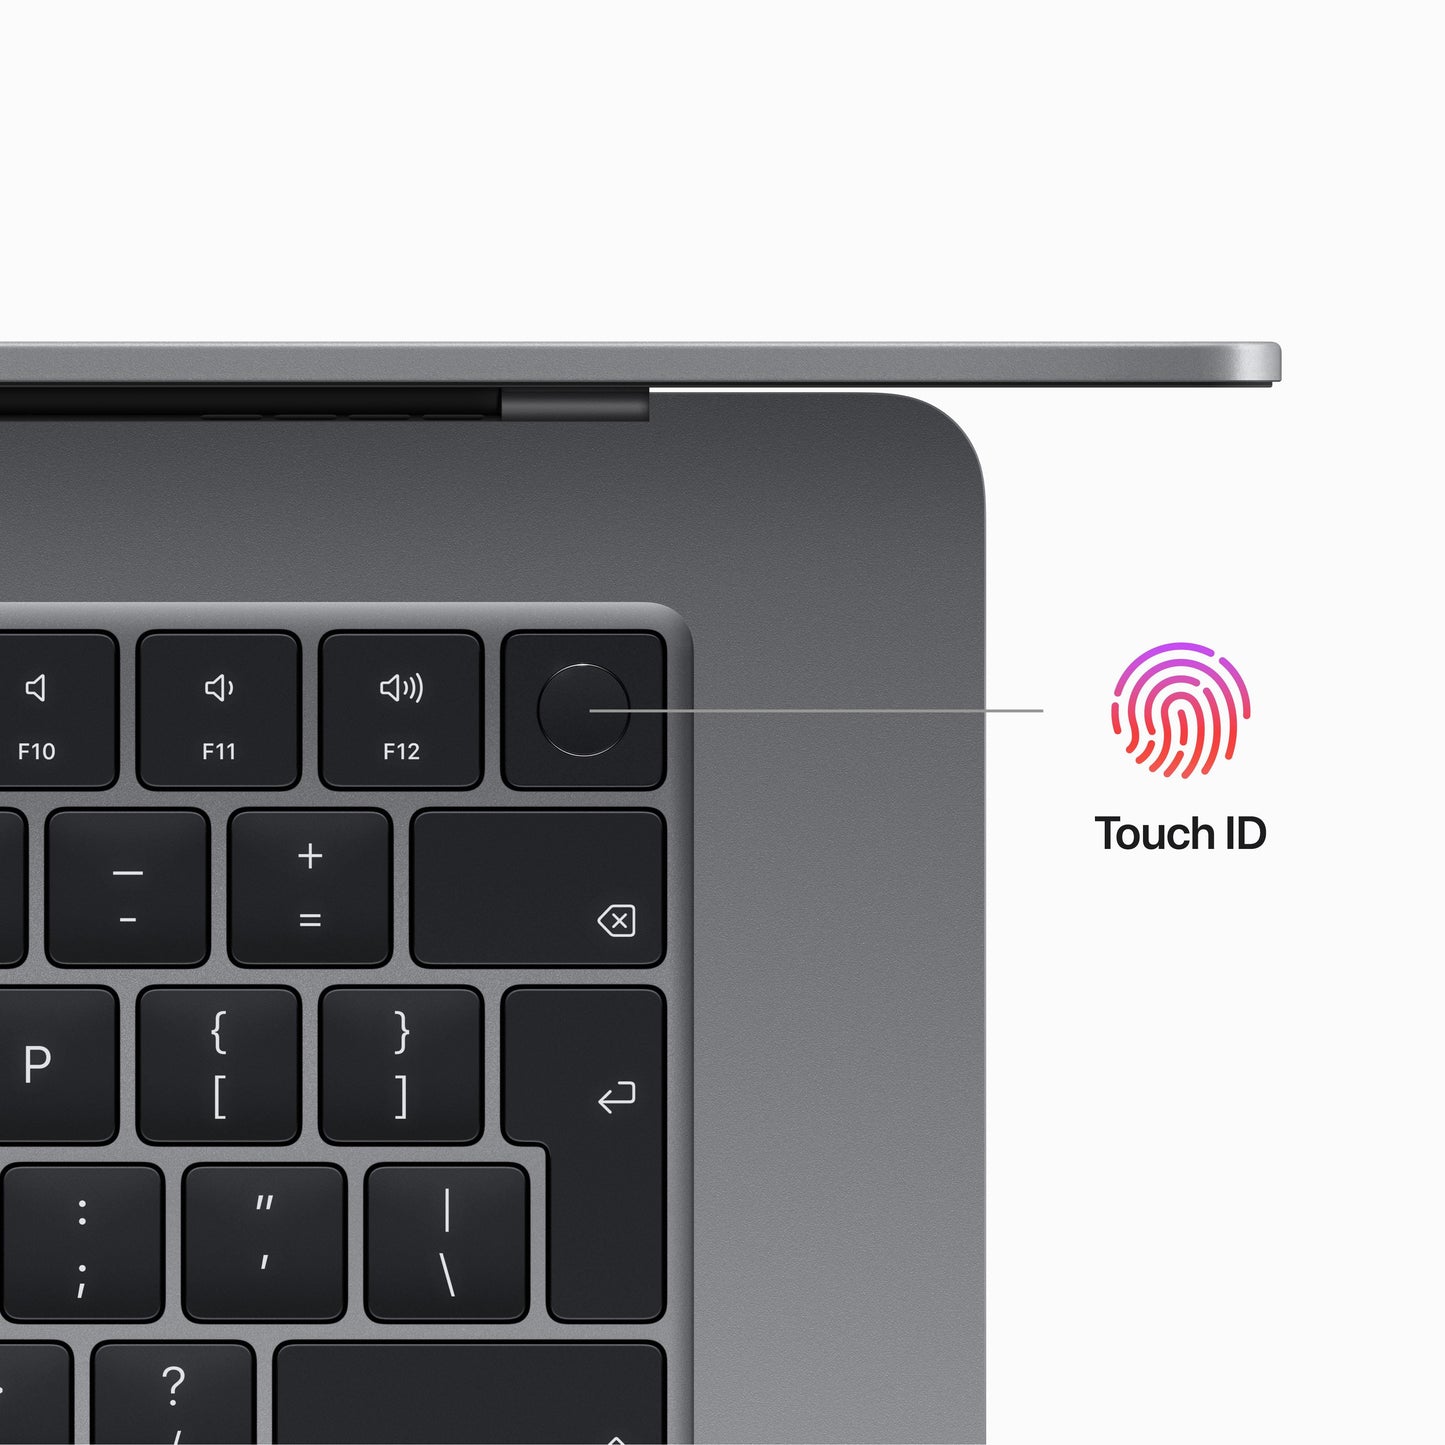 15-inch MacBook Air: Apple M2 chip with 8‑core CPU and 10‑core GPU, 256GB SSD - Space Grey